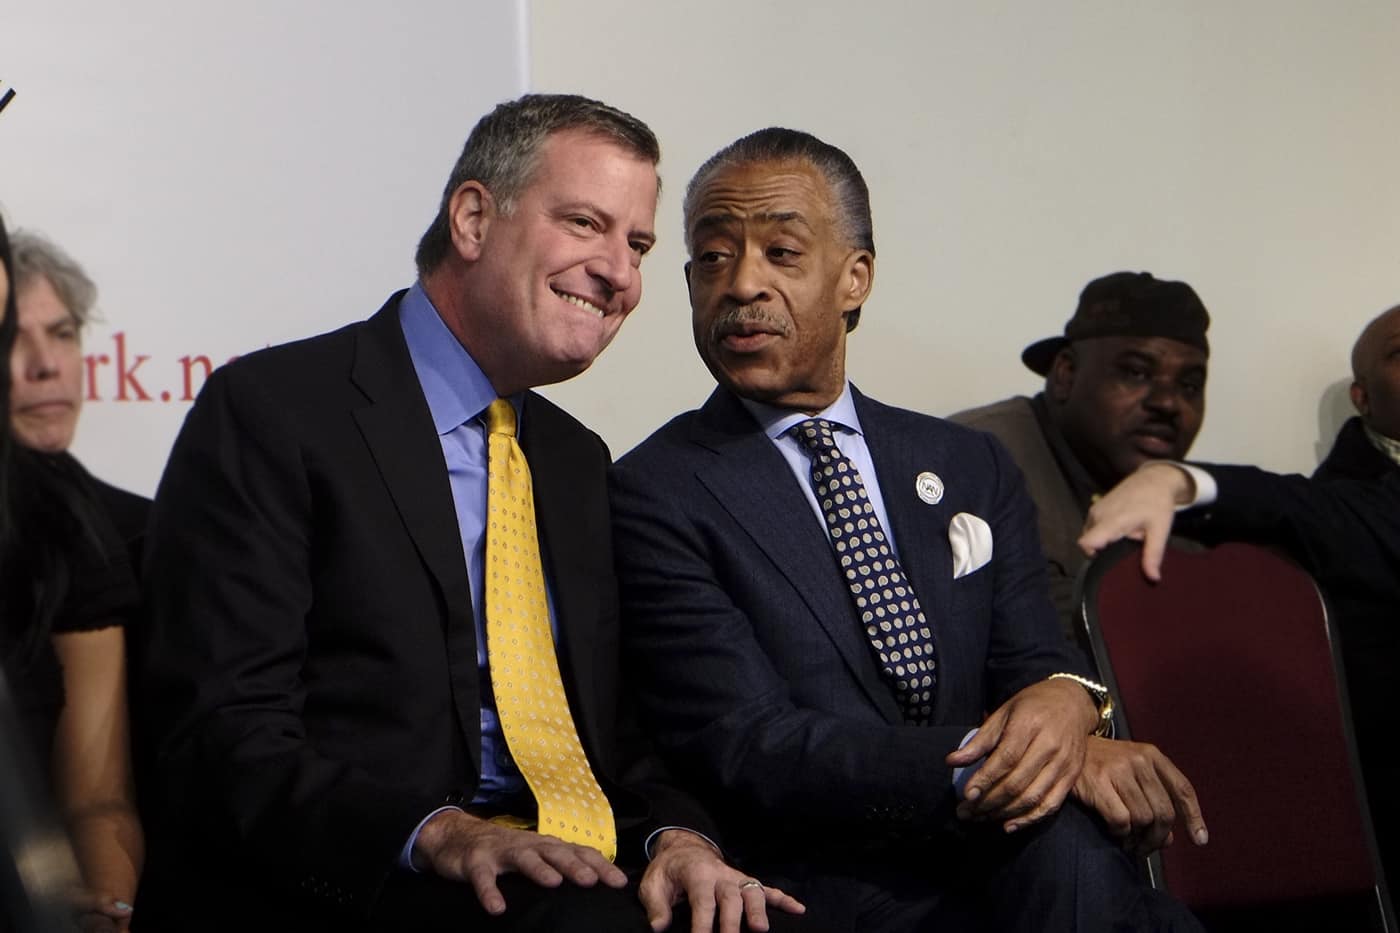 mayor-elect-bill-de-blasio-at-the-national-action-network-image-5-credit-to-william-alatriste